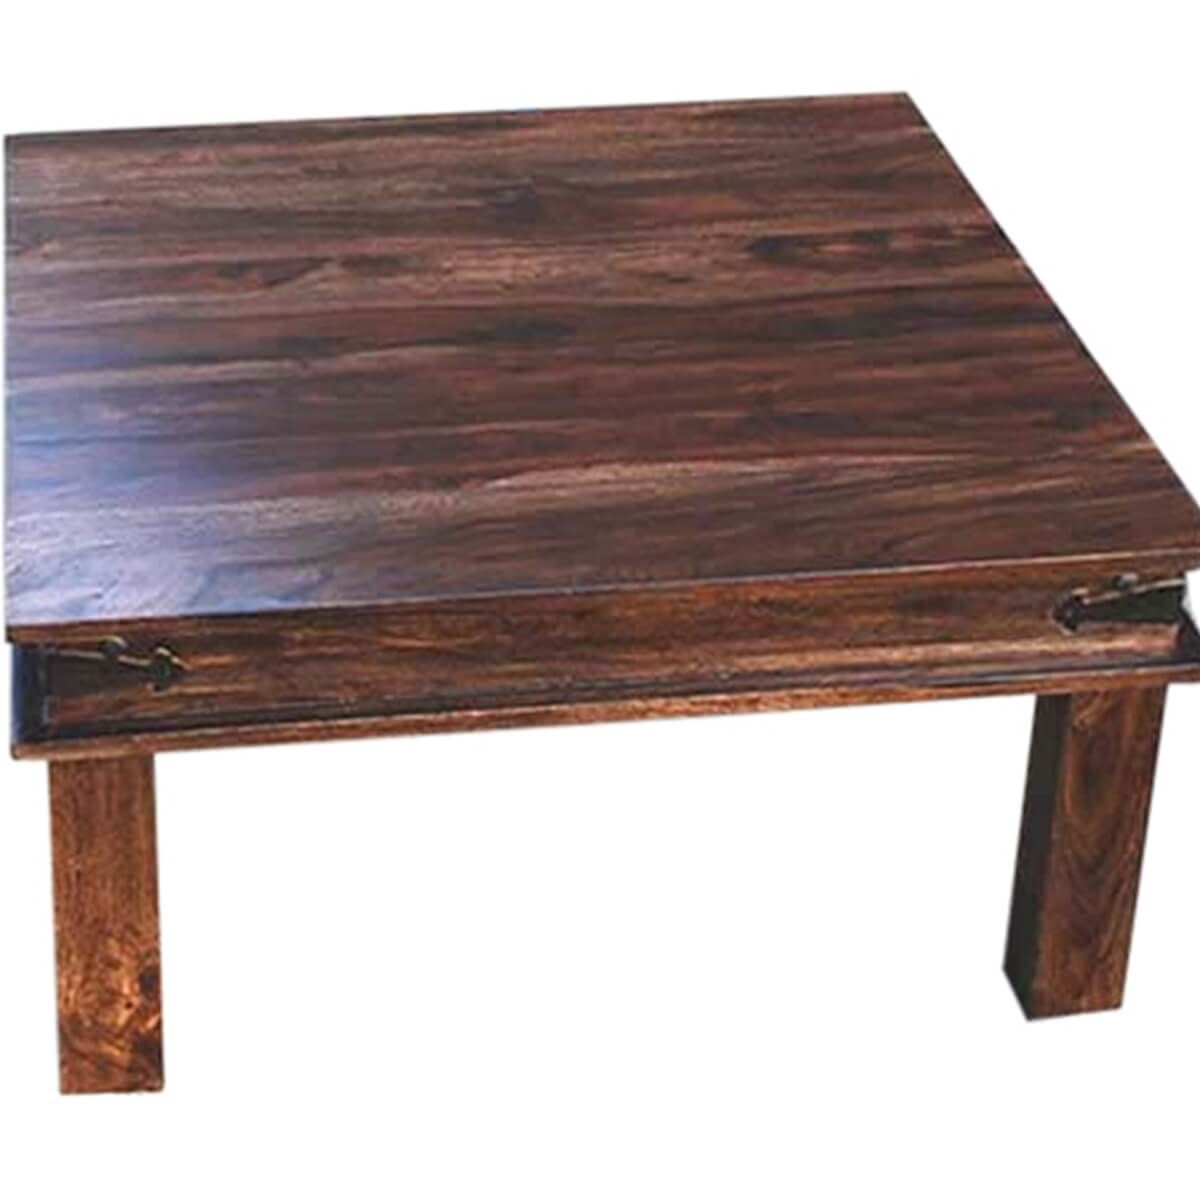 Rustic Solid Wood Square Cocktail Coffee Table Inside Rustic Espresso Wood Console Tables (View 4 of 20)